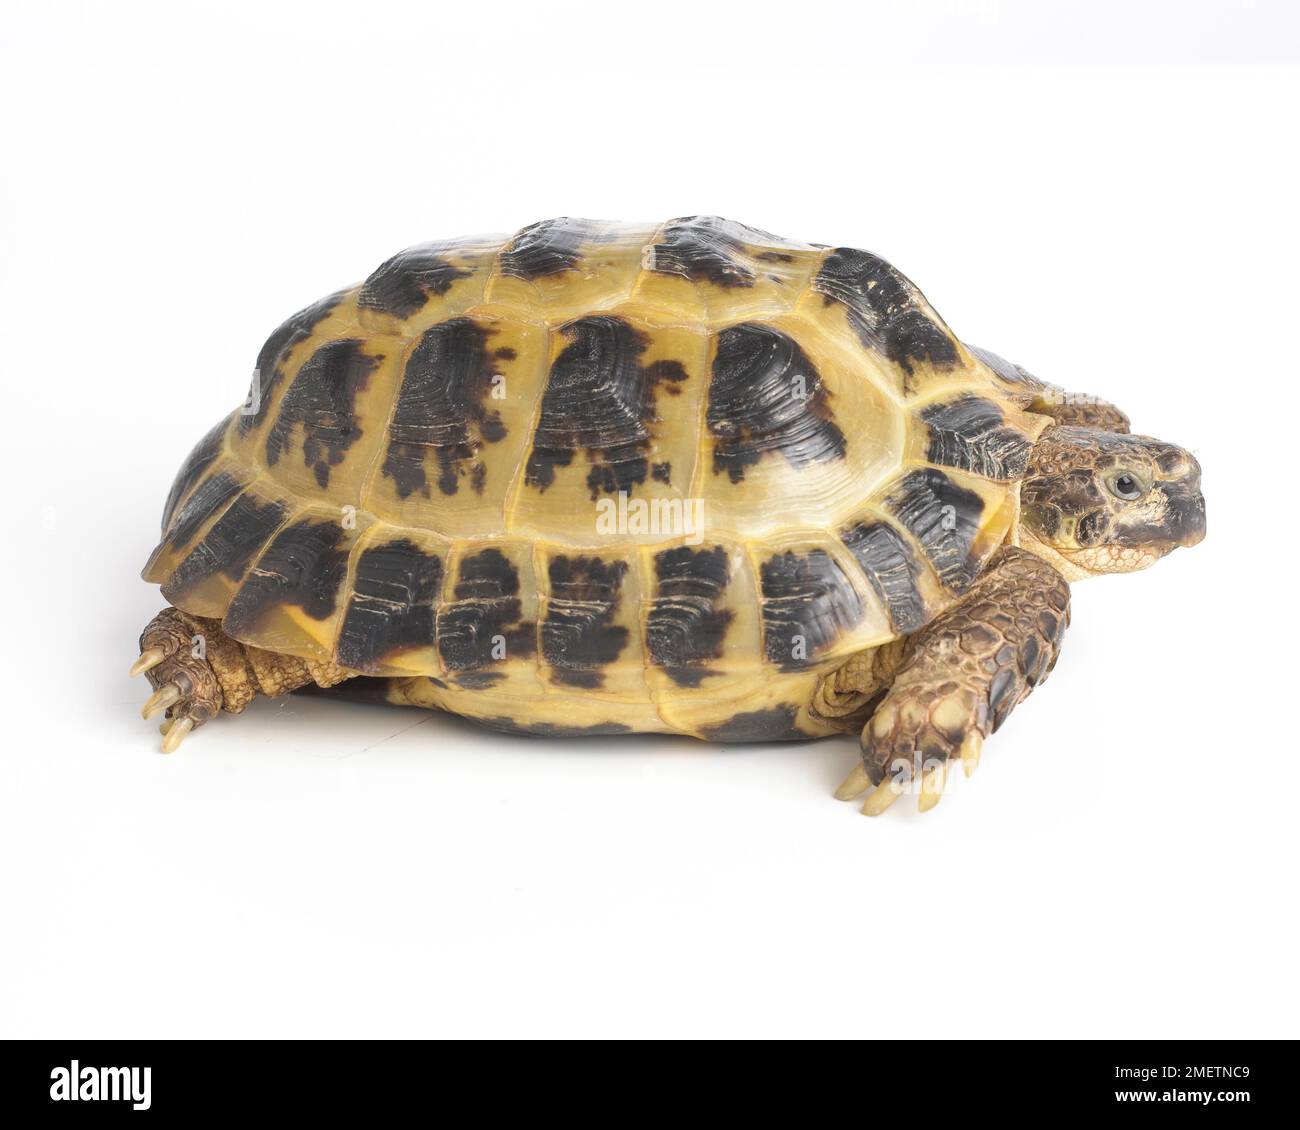 Young Horsefields Tortoise, Russian Tortoise (Agrionemys horsfieldii), 4-year-old Stock Photo